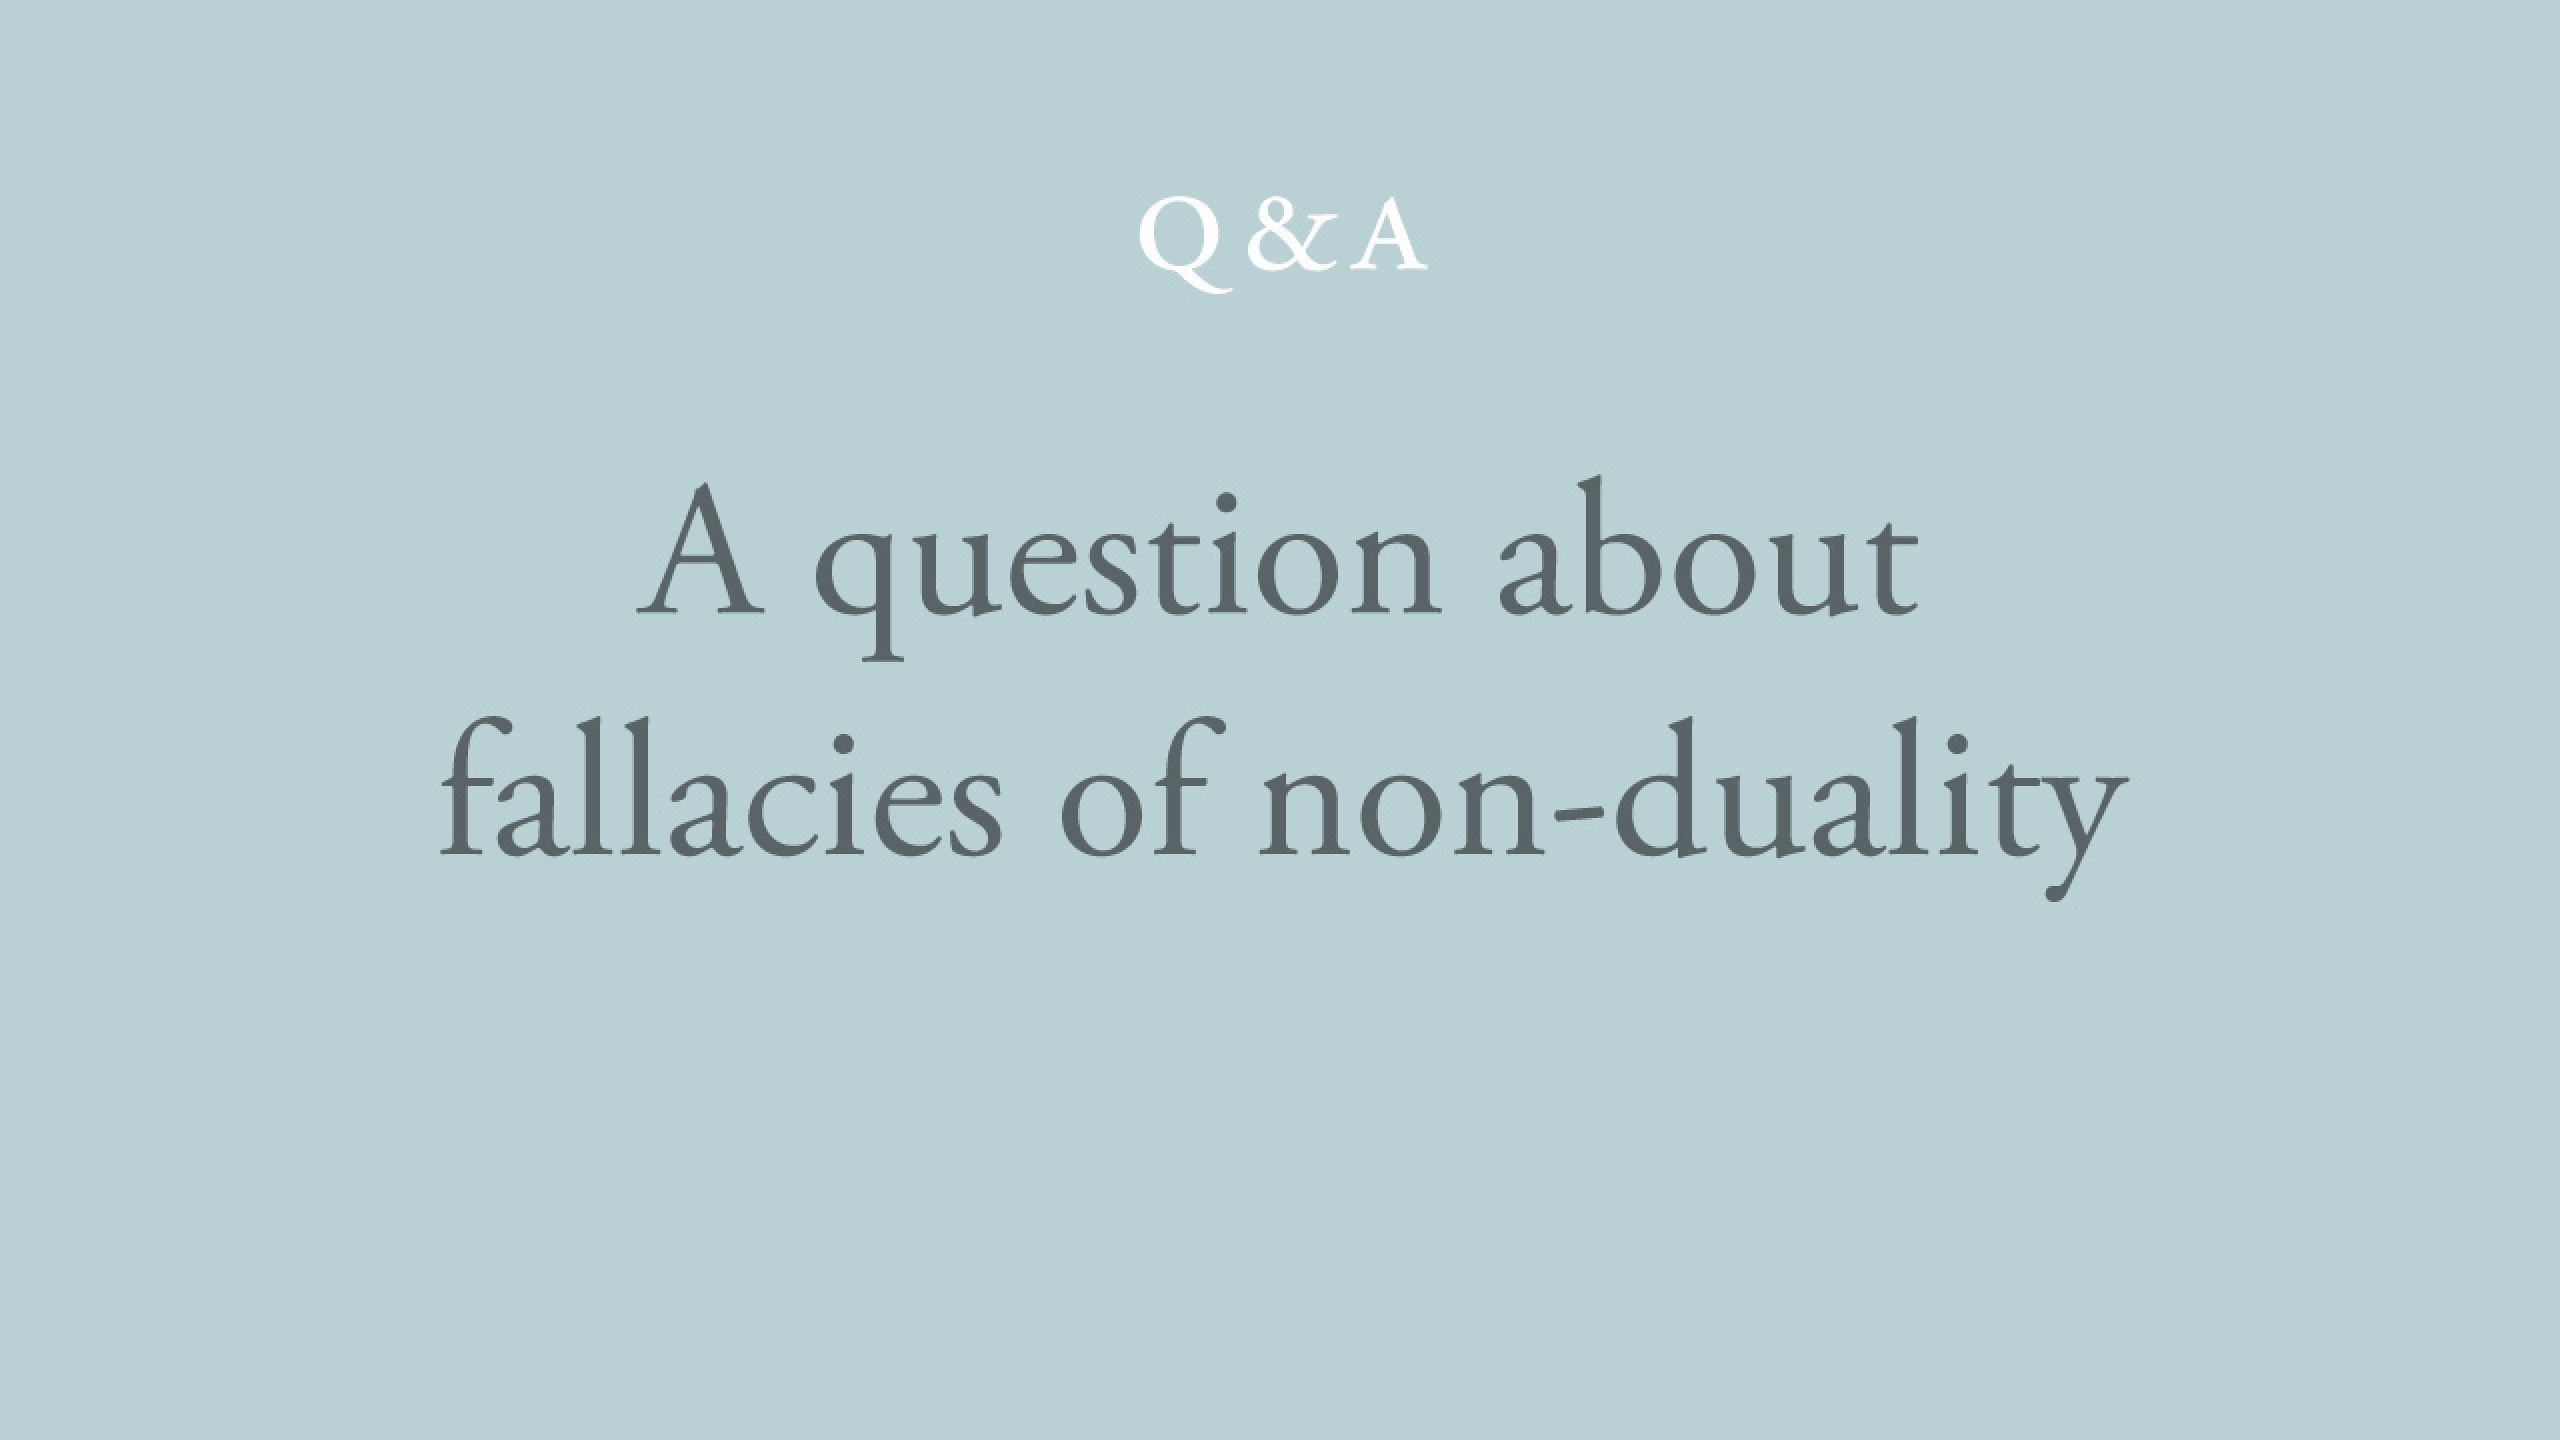 What are the most common fallacies about non-duality?